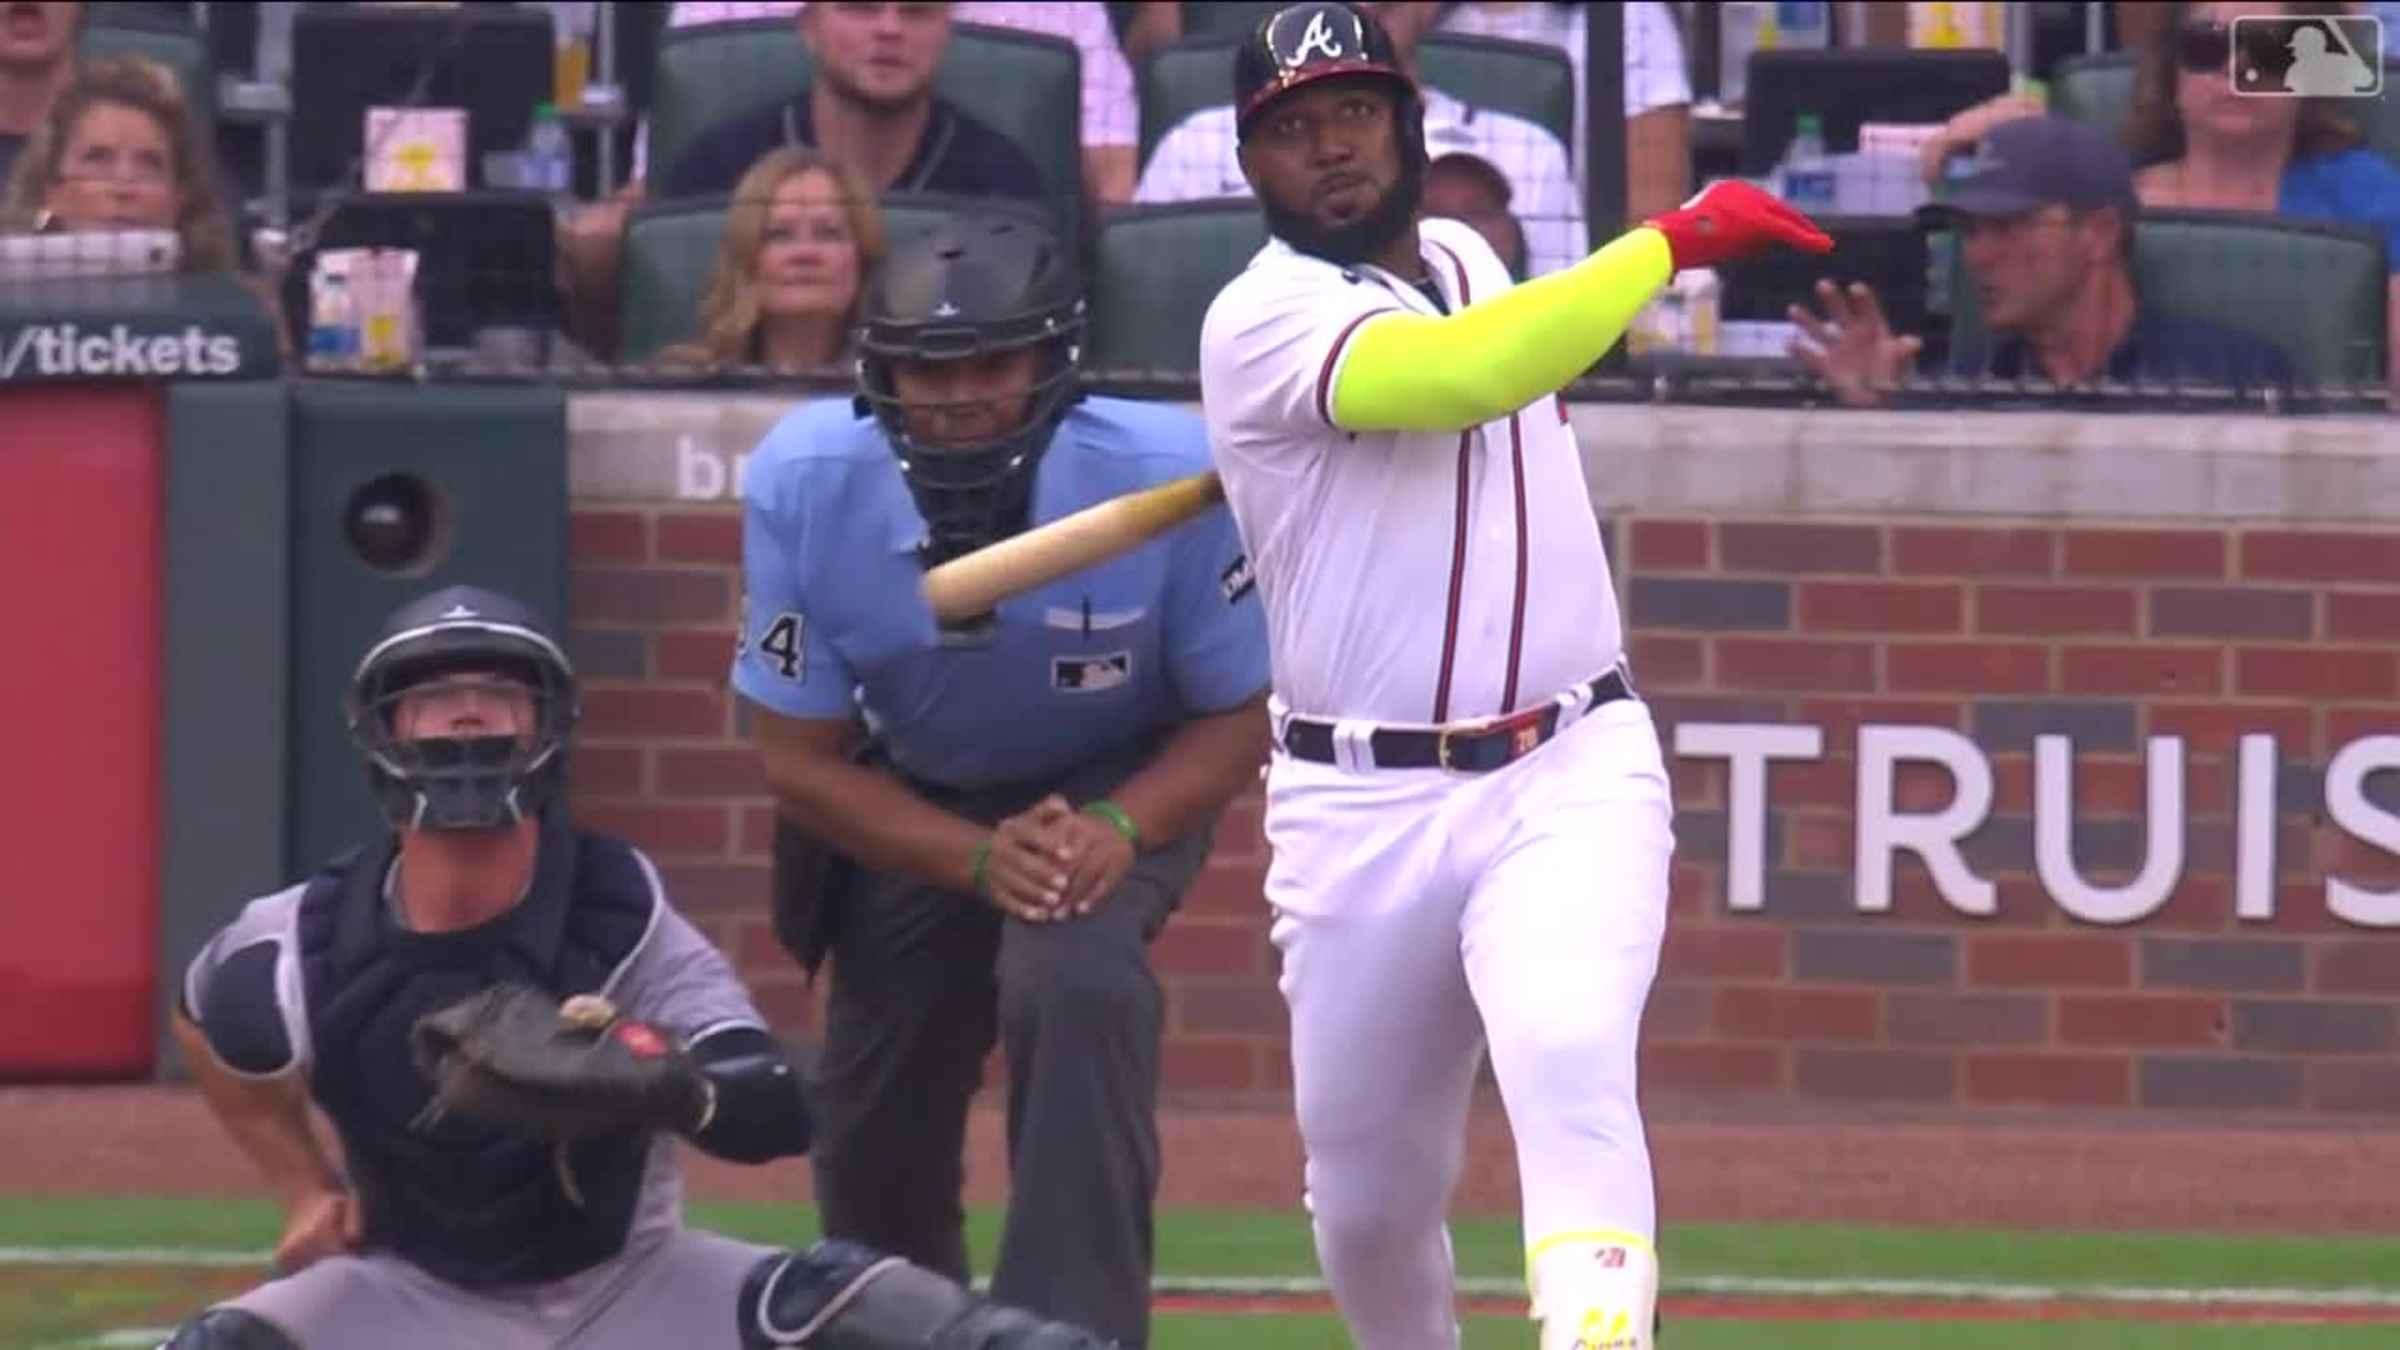 Marcell Ozuna's home run trot features every celebration